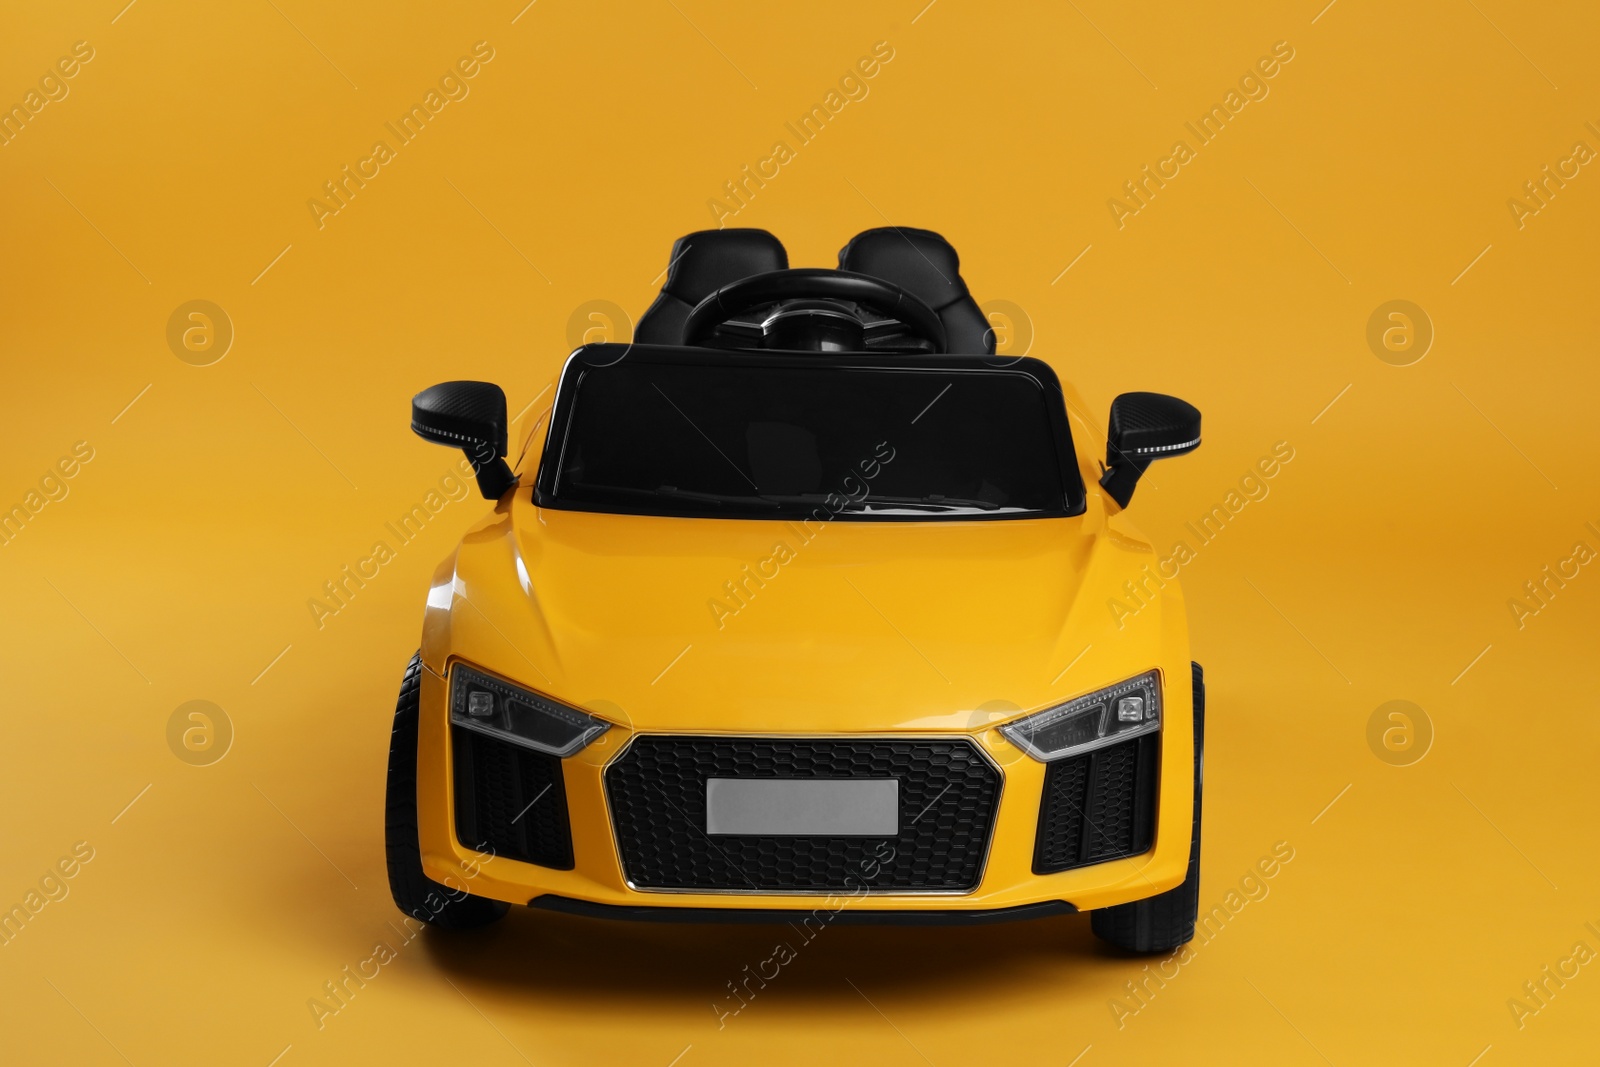 Photo of Child's electric toy car on yellow background